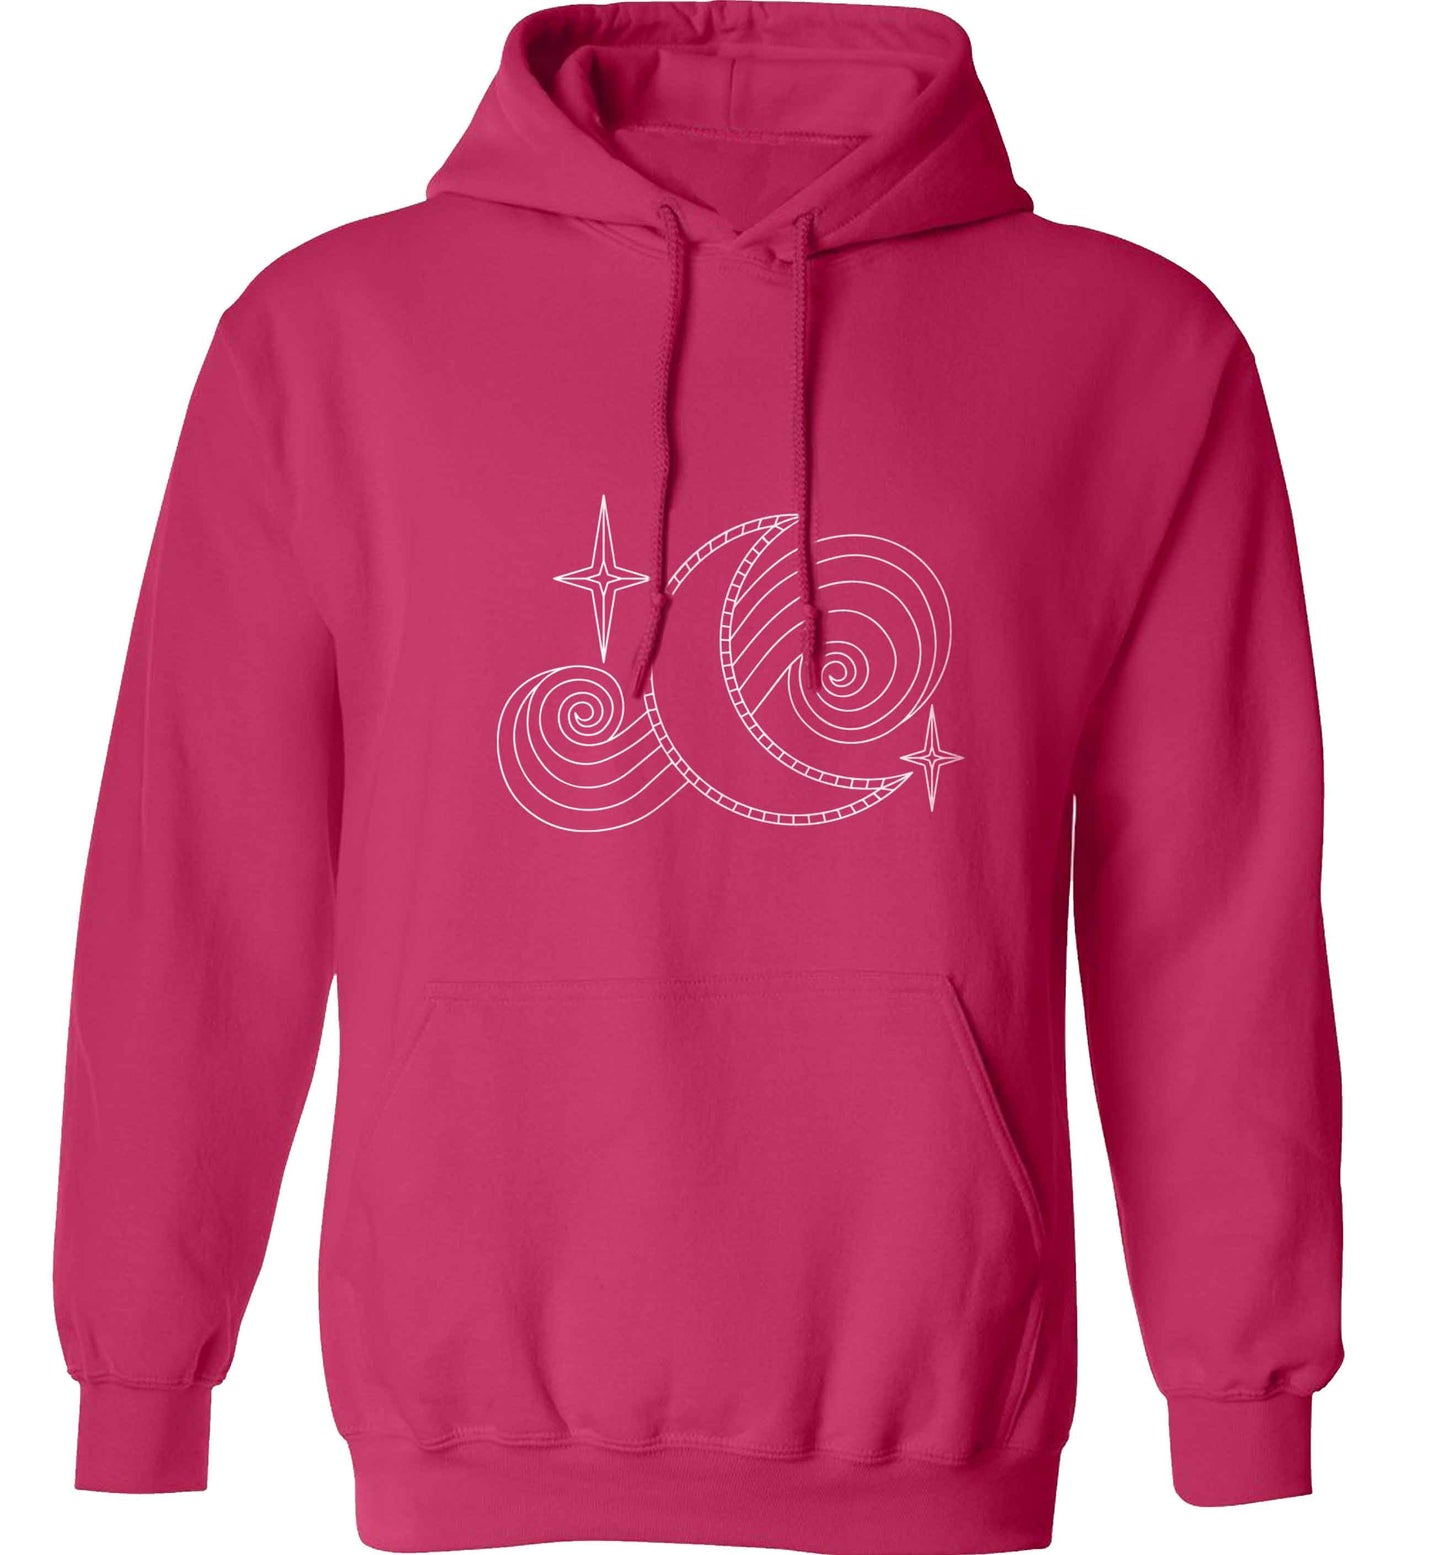 Moon and stars illustration adults unisex pink hoodie 2XL